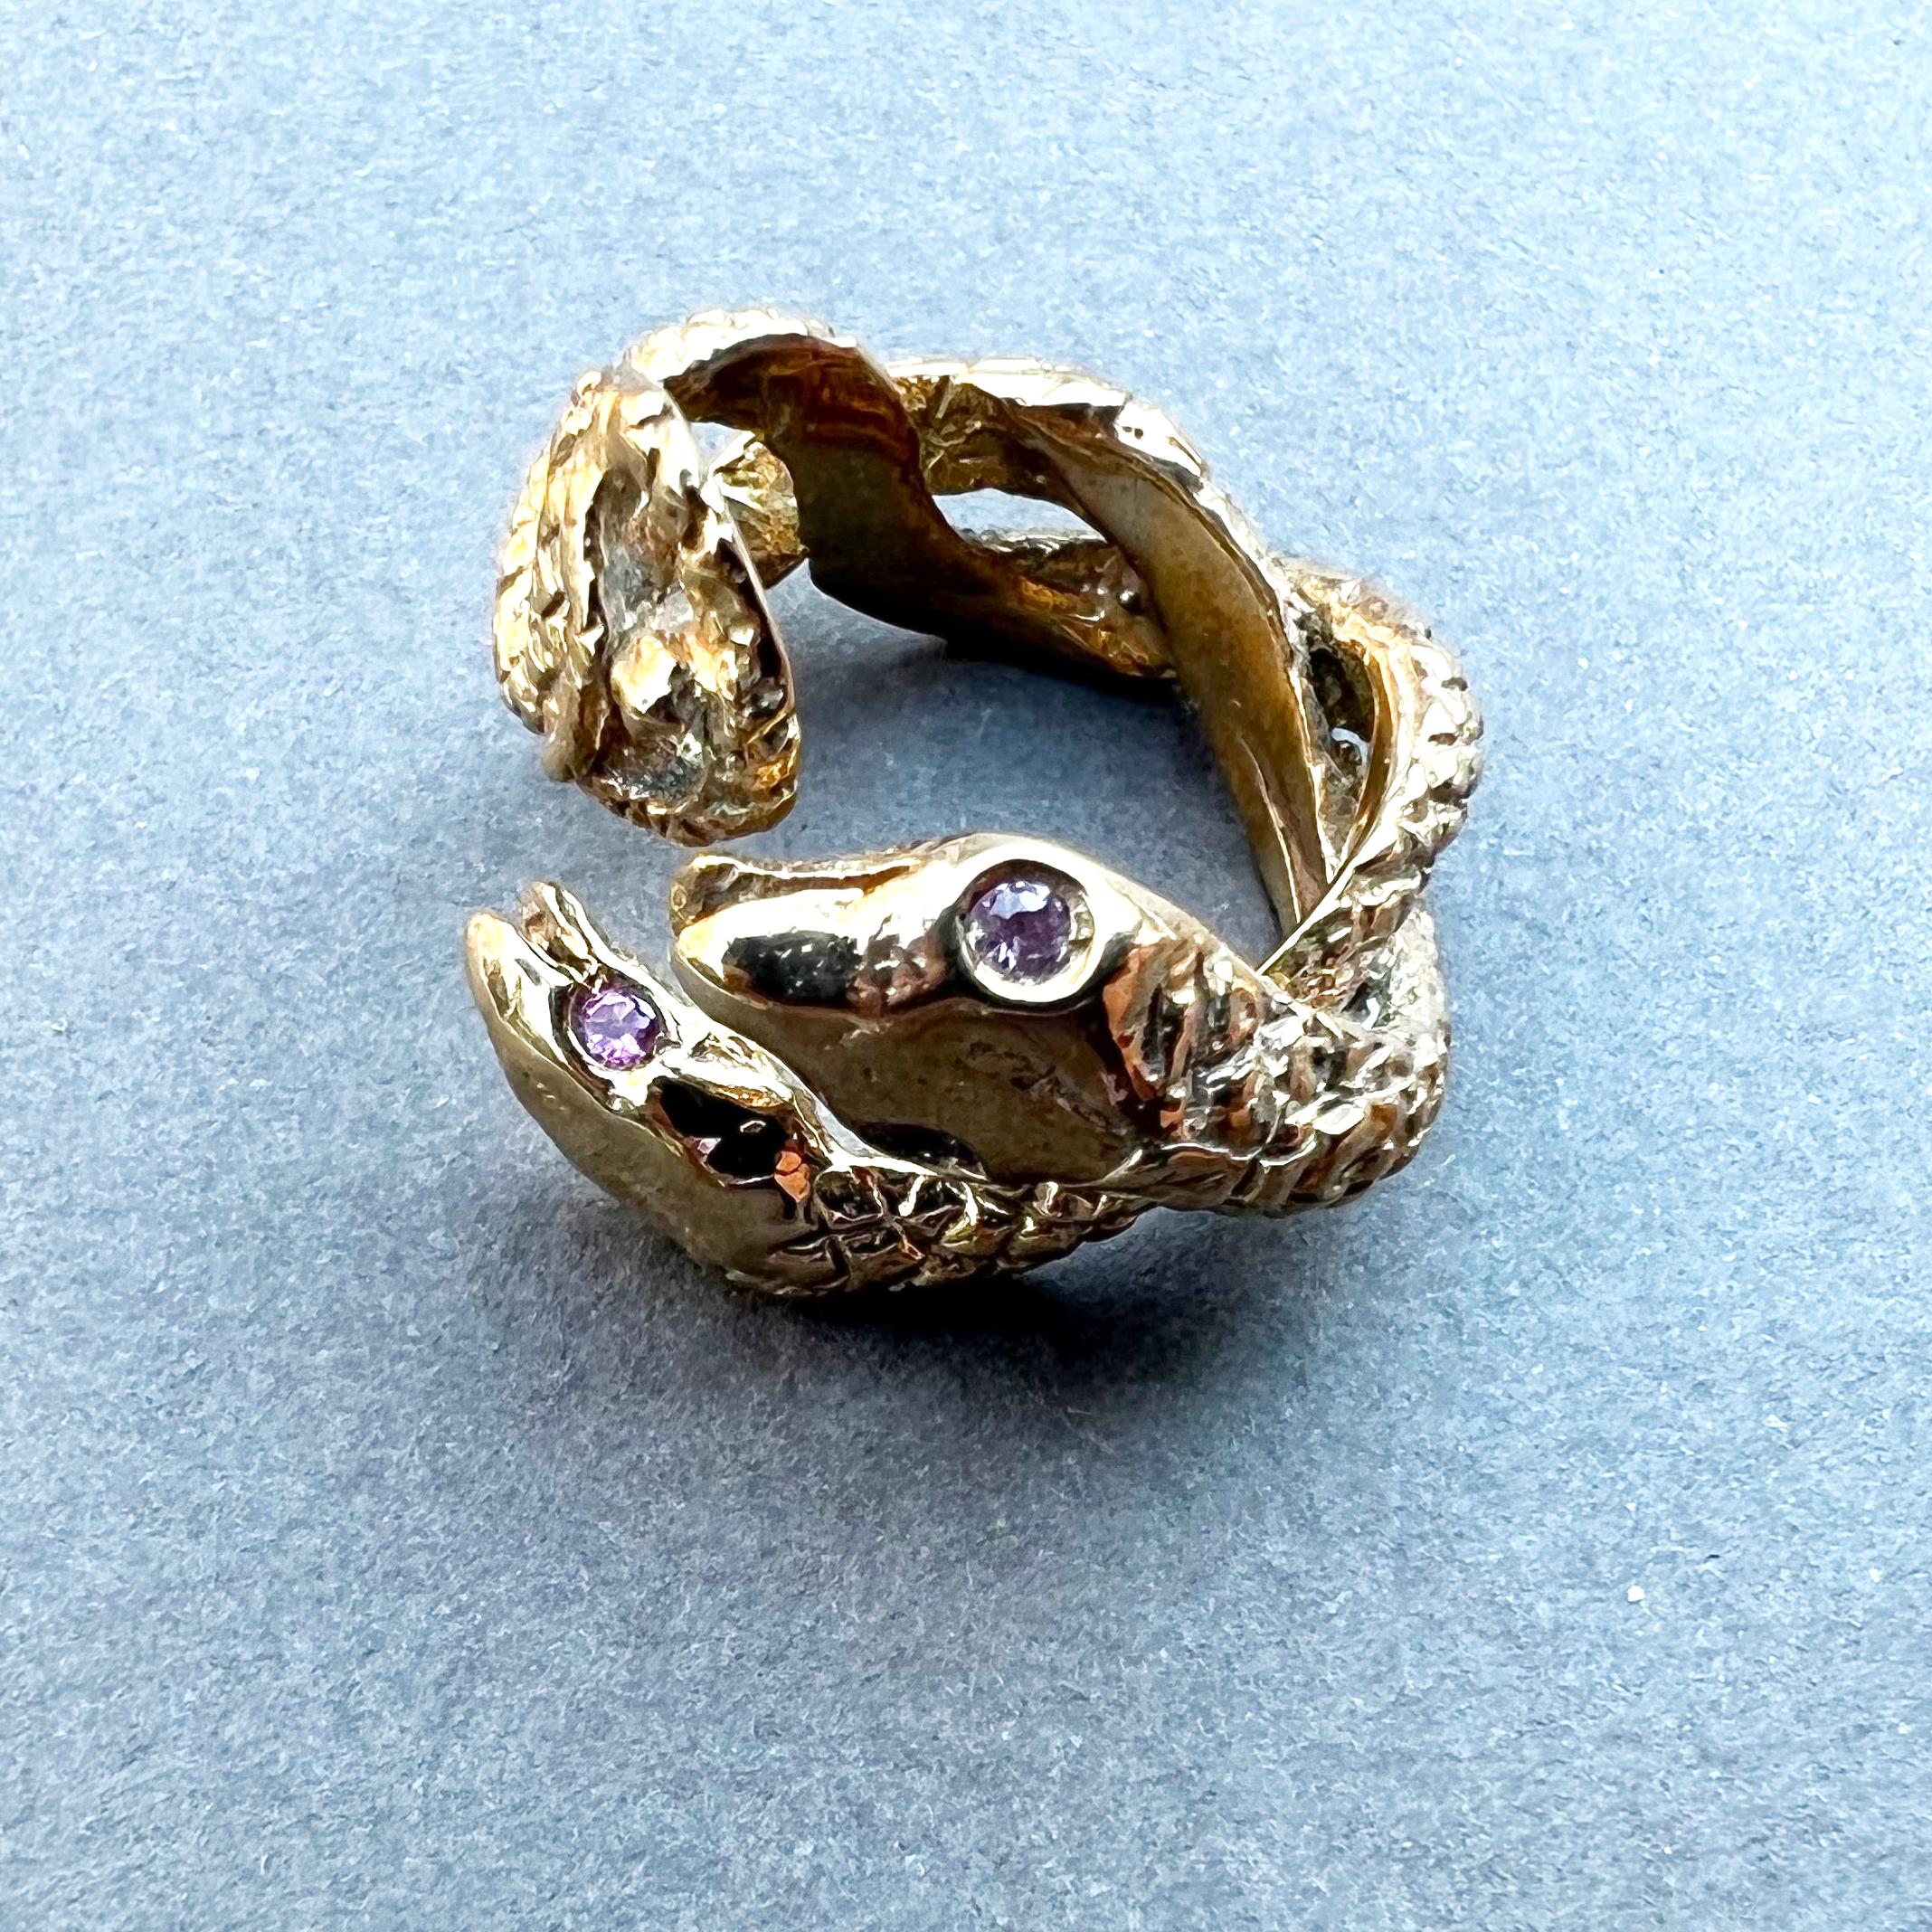 Animal jewelry Pink Sapphire Snake Ring Bronze Cocktail Ring J Dauphin For Sale 1